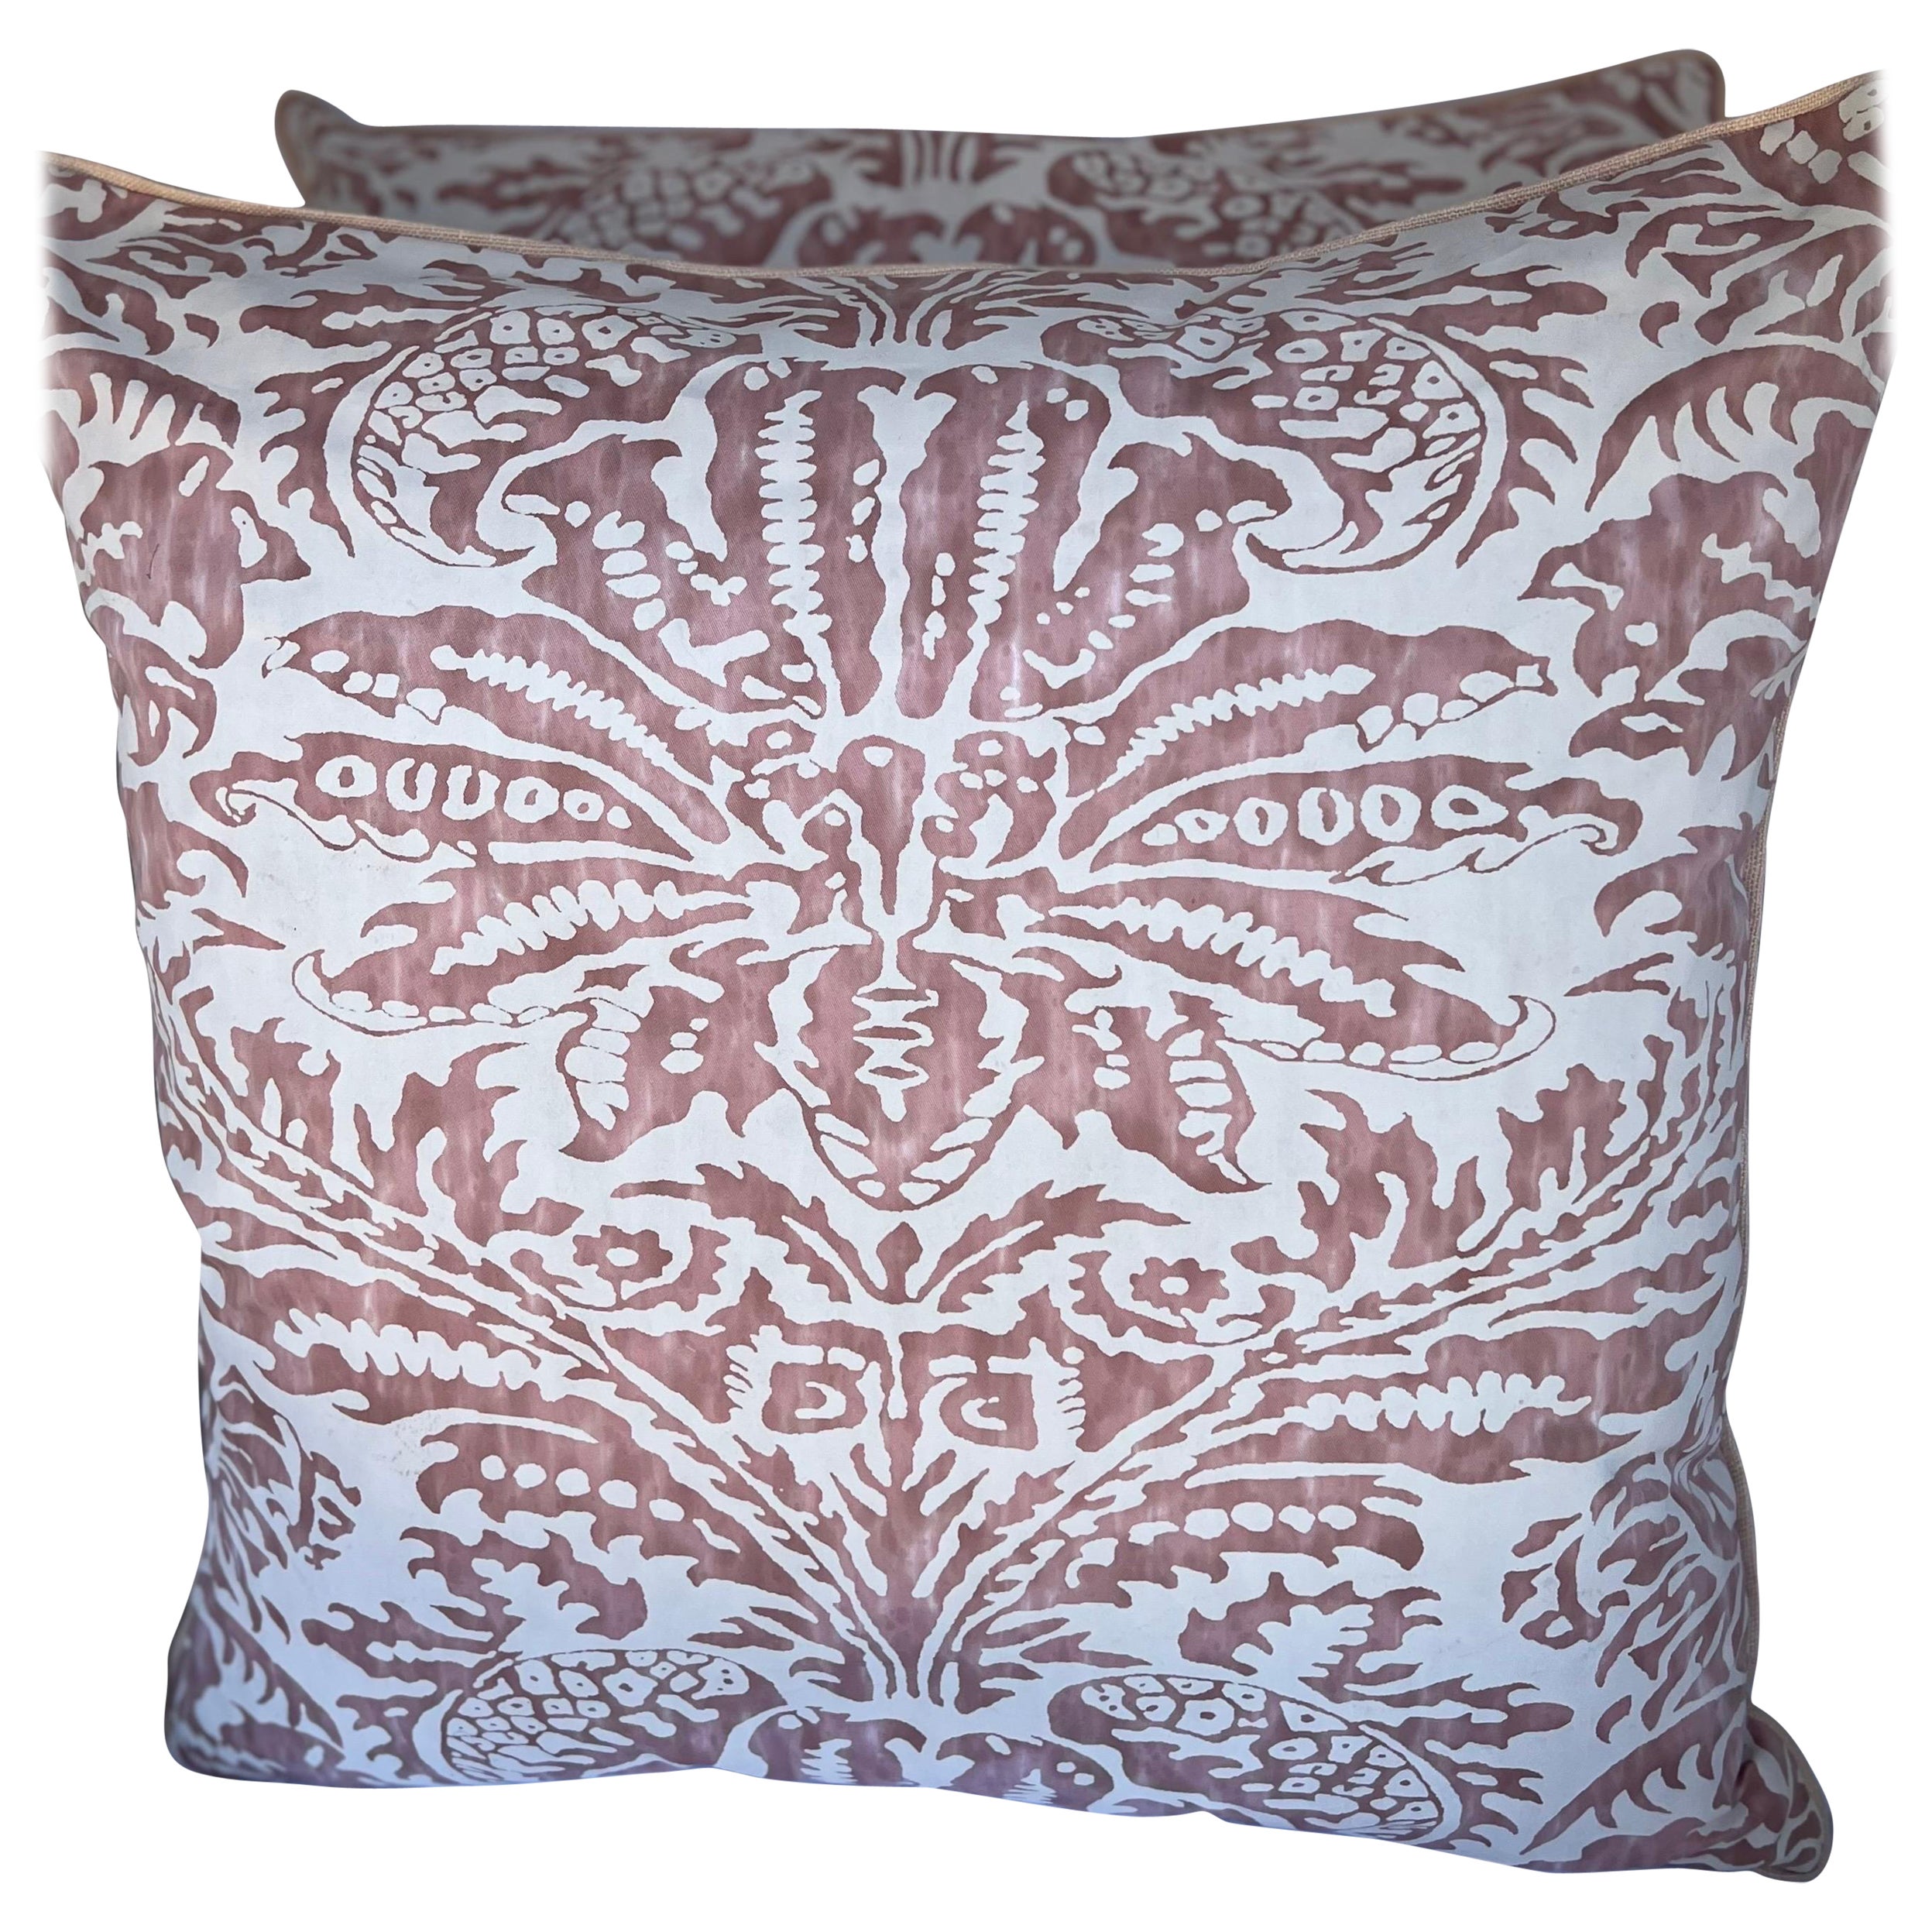 Pink & White Glicine Fortuny Patterned Textile Pillow For Sale